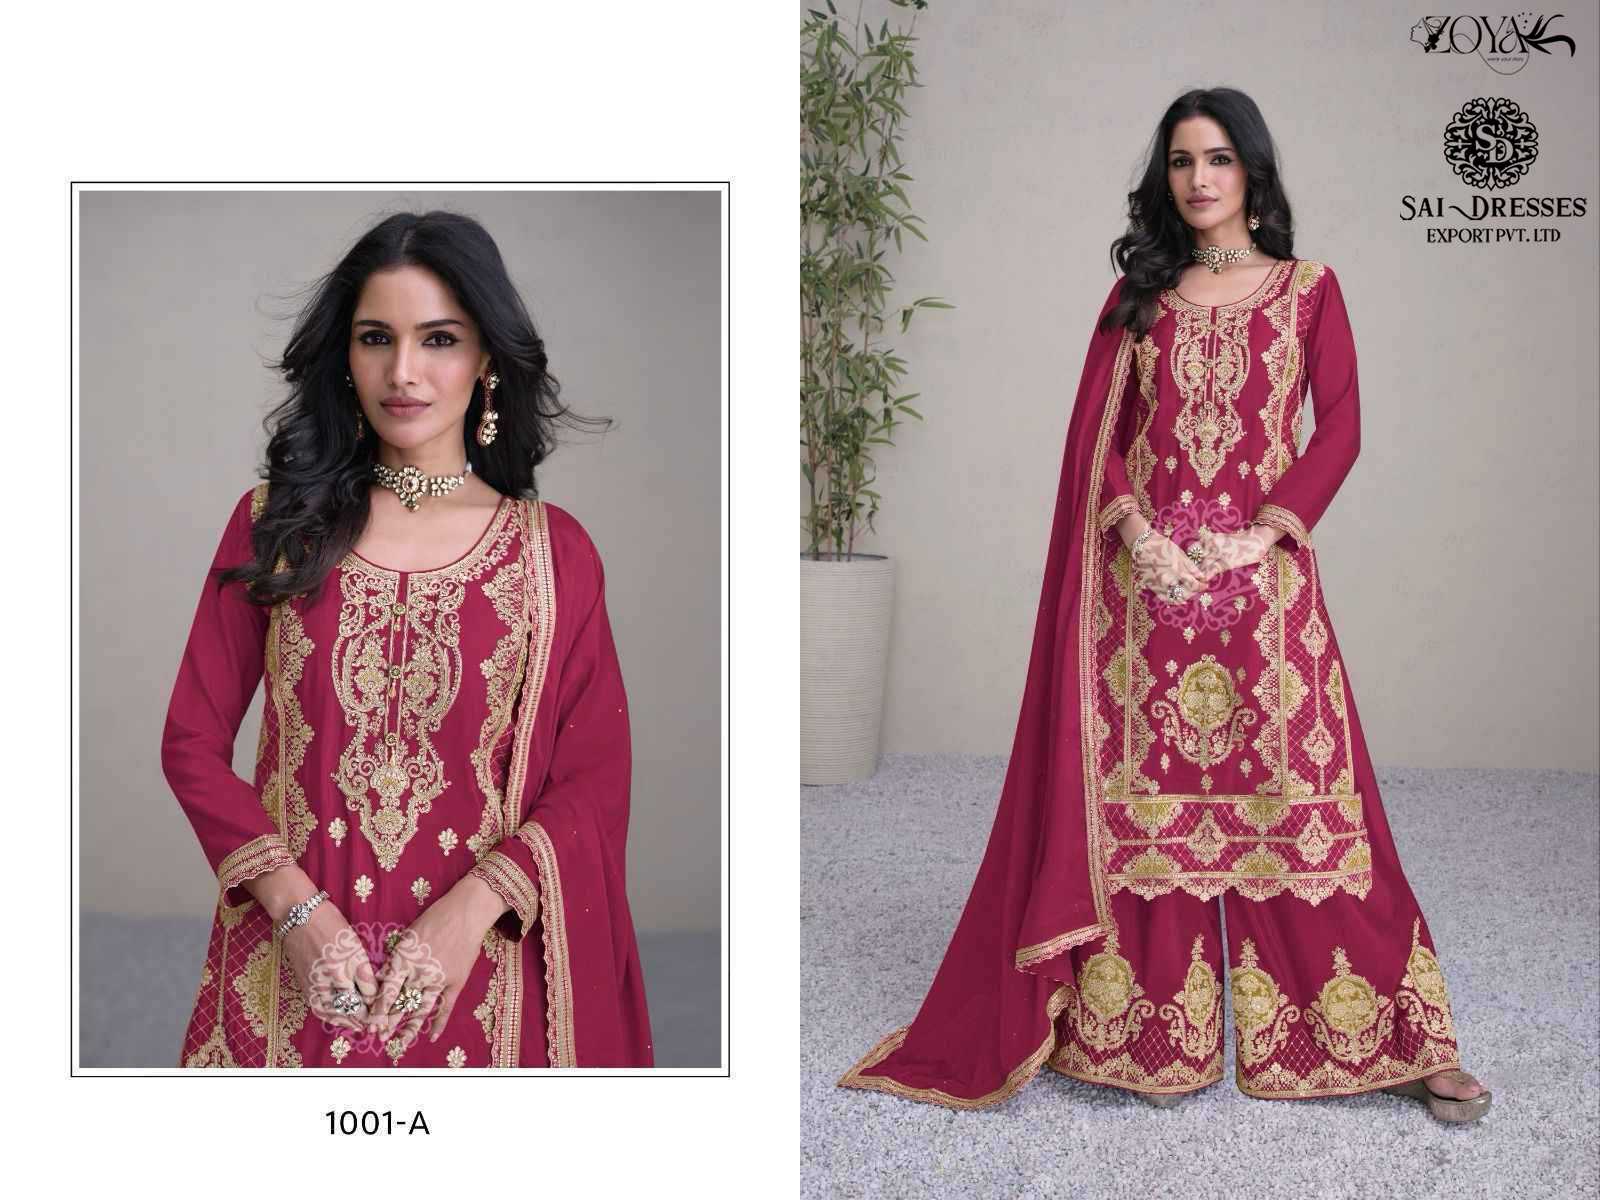 HIRWA READY TO ETHNIC WEAR DESIGNER 3 PIECE SUITS IN WHOLESALE RATE IN SURAT 